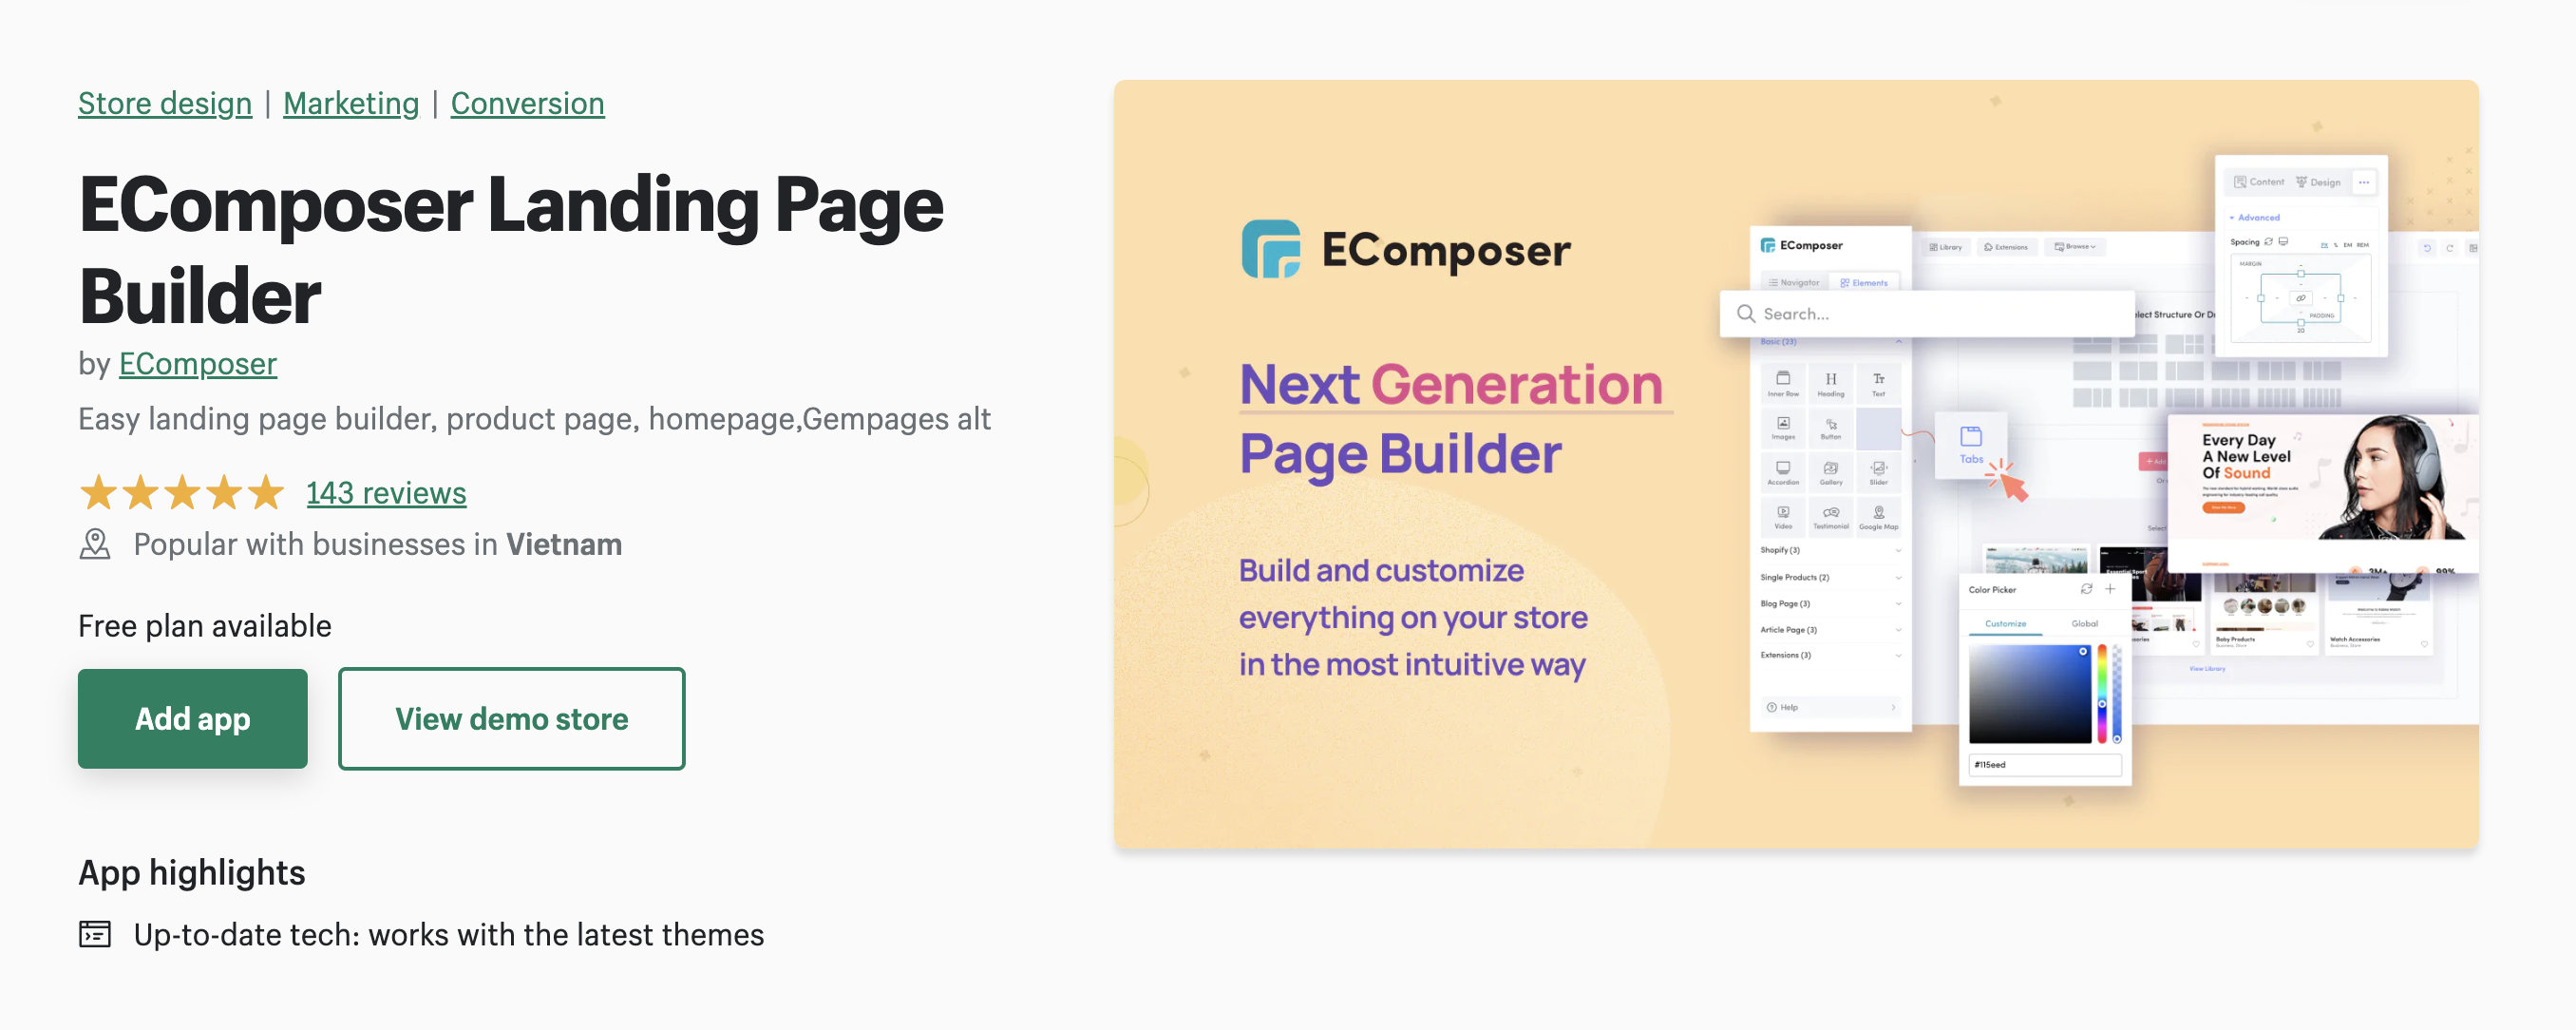 EComposer - High Converting Page Builder